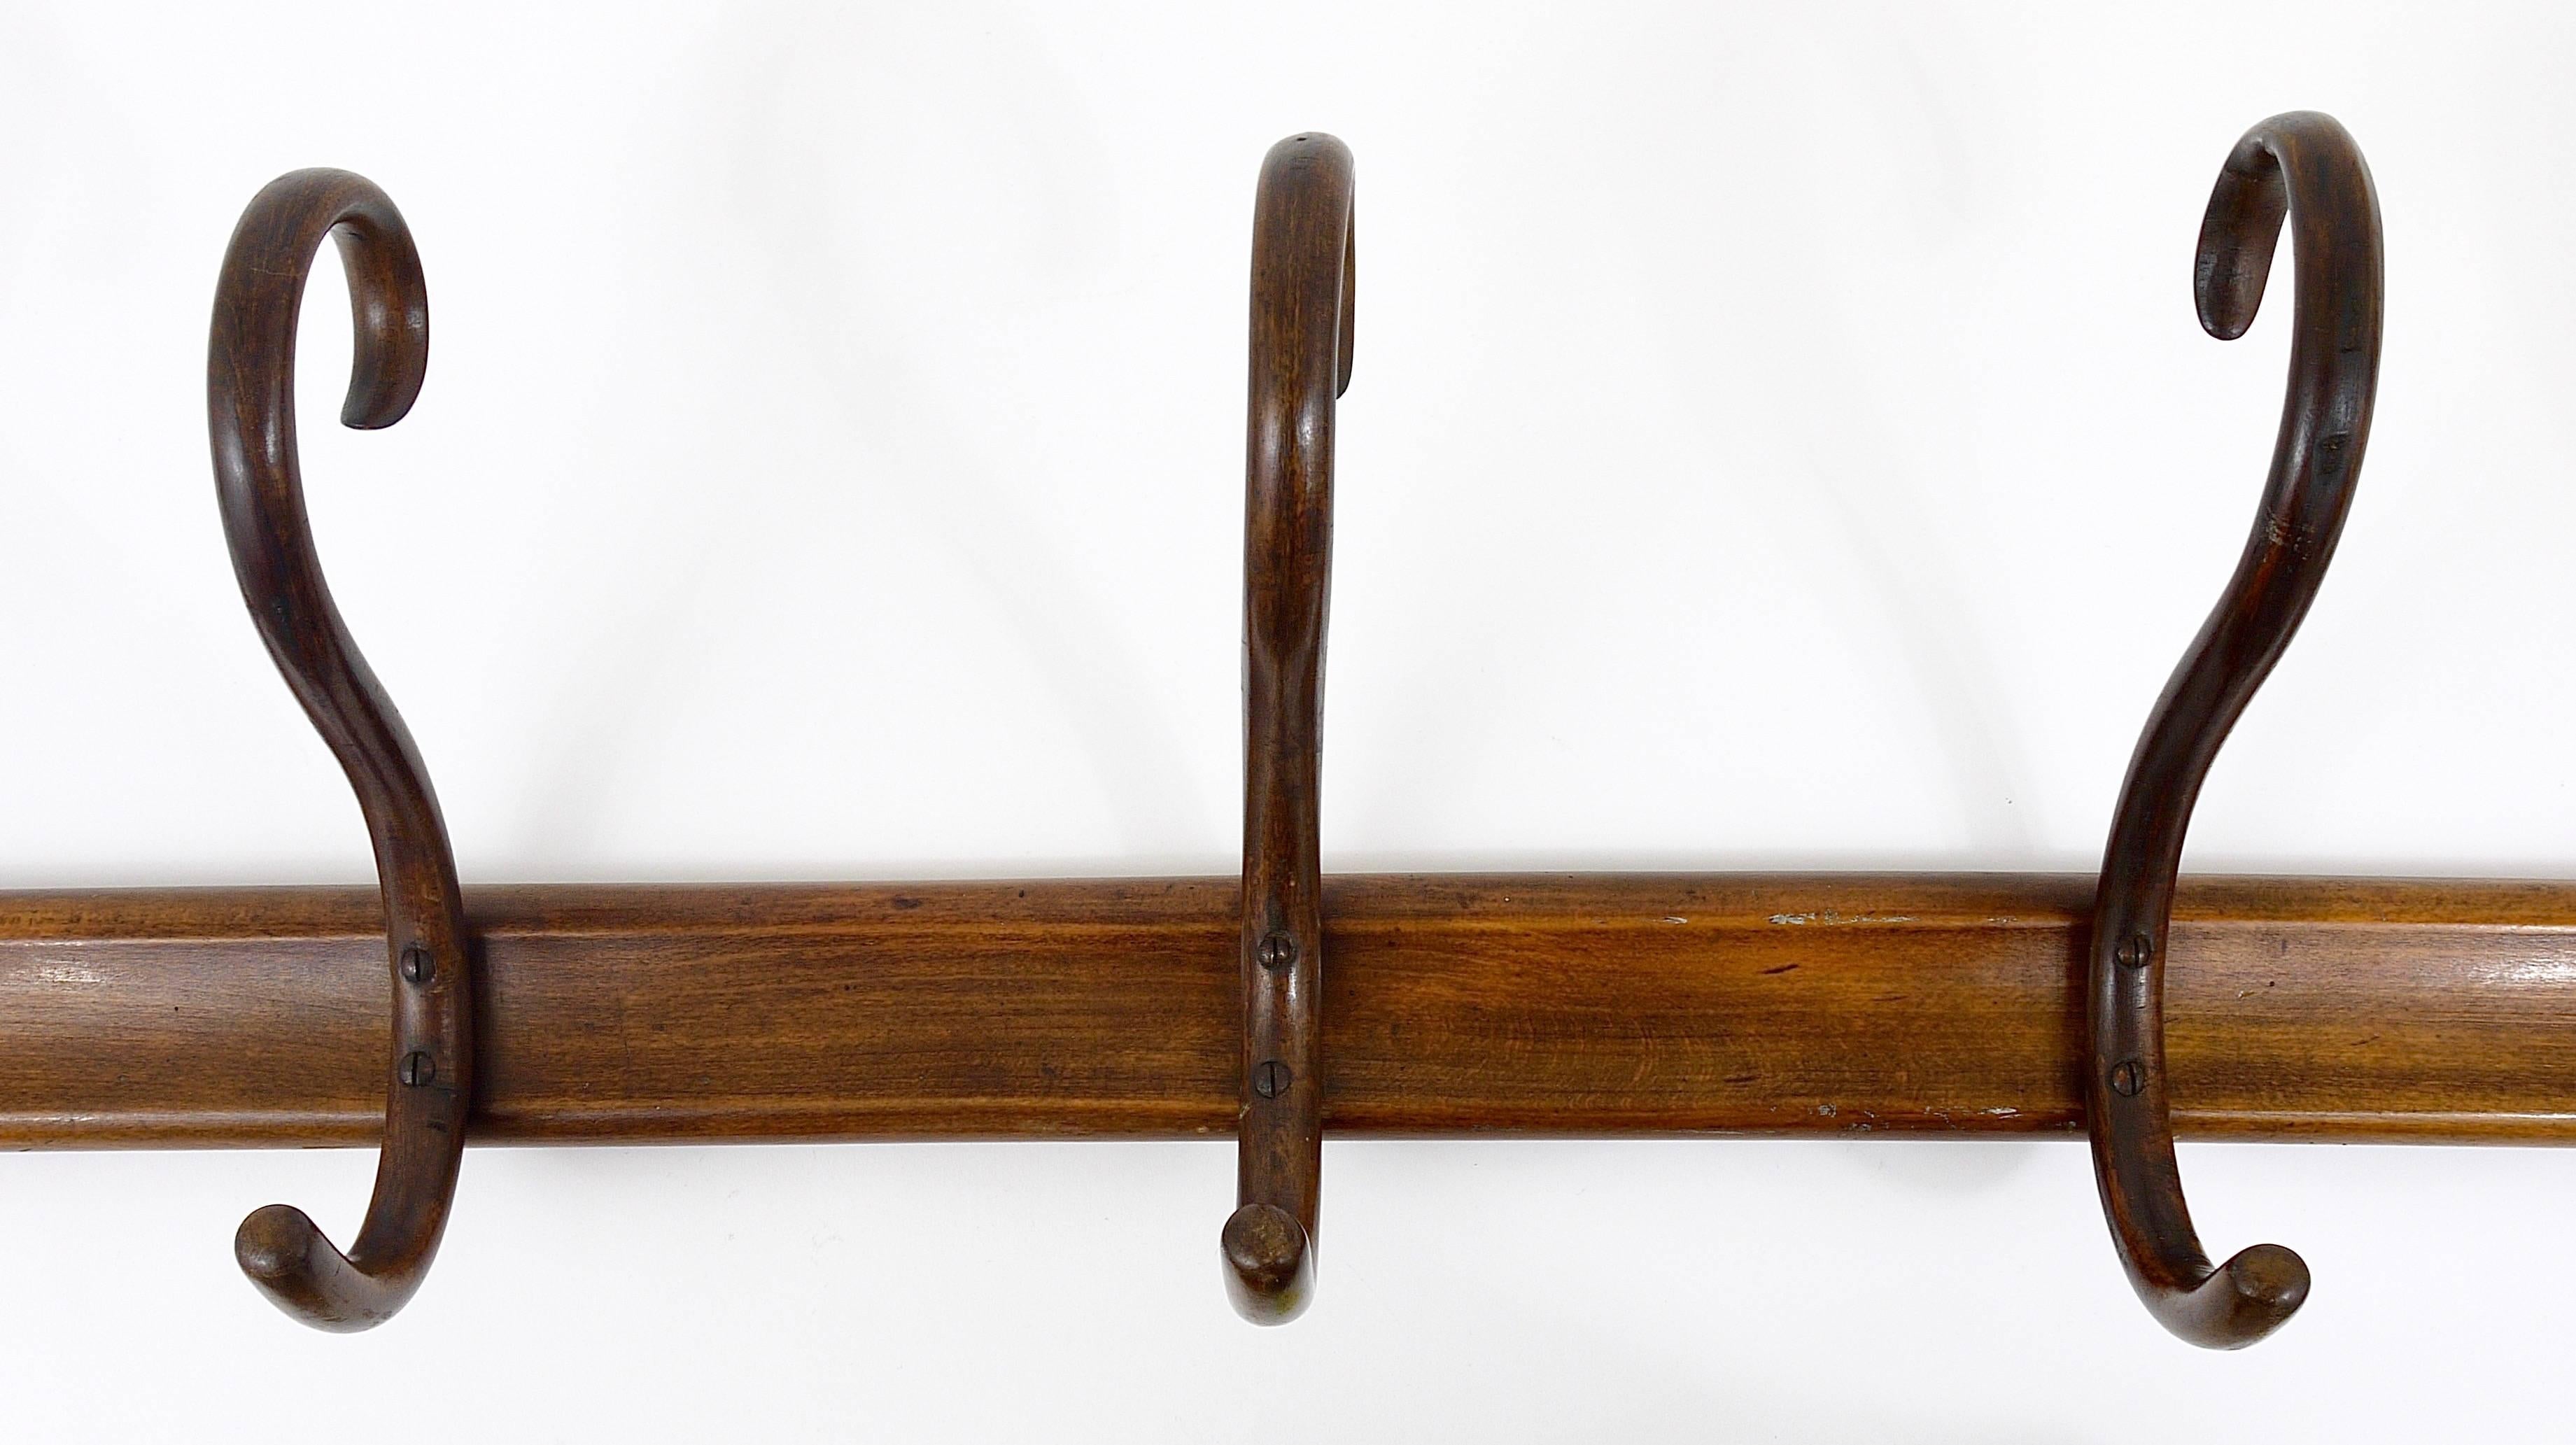 Early 20th Century 1920s Thonet Vienna Art Nouveau Bentwood Wall Coat Rack with S Hooks, Austria